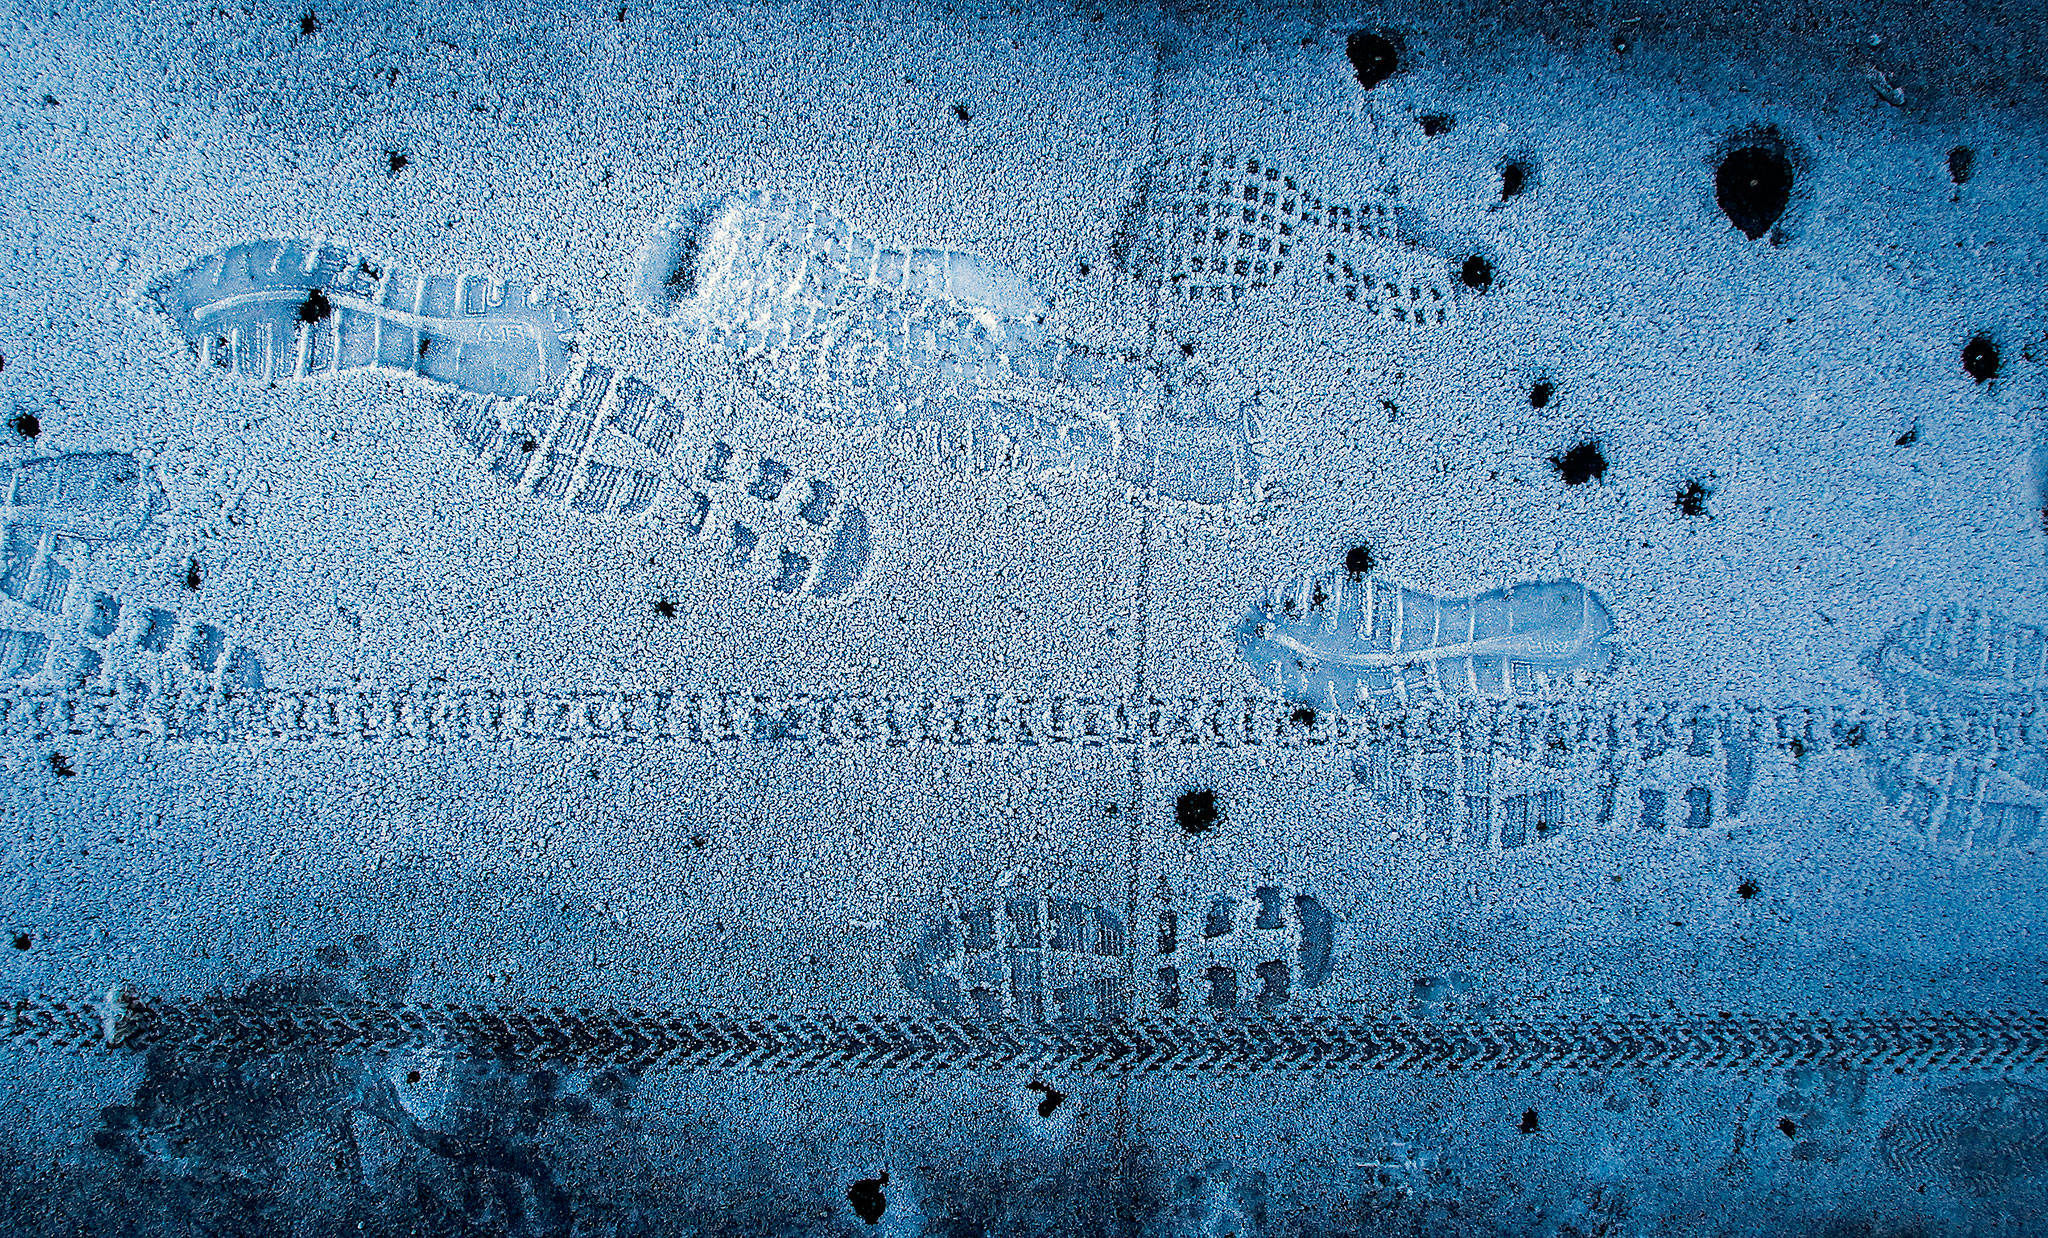 All the footprints on the frost-coated sidewalk of a W. Mukilteo Boulevard bridge over Merrill and Ring Creek on Monday morning appear to be from people heading south. (Dan Bates / The Herald)